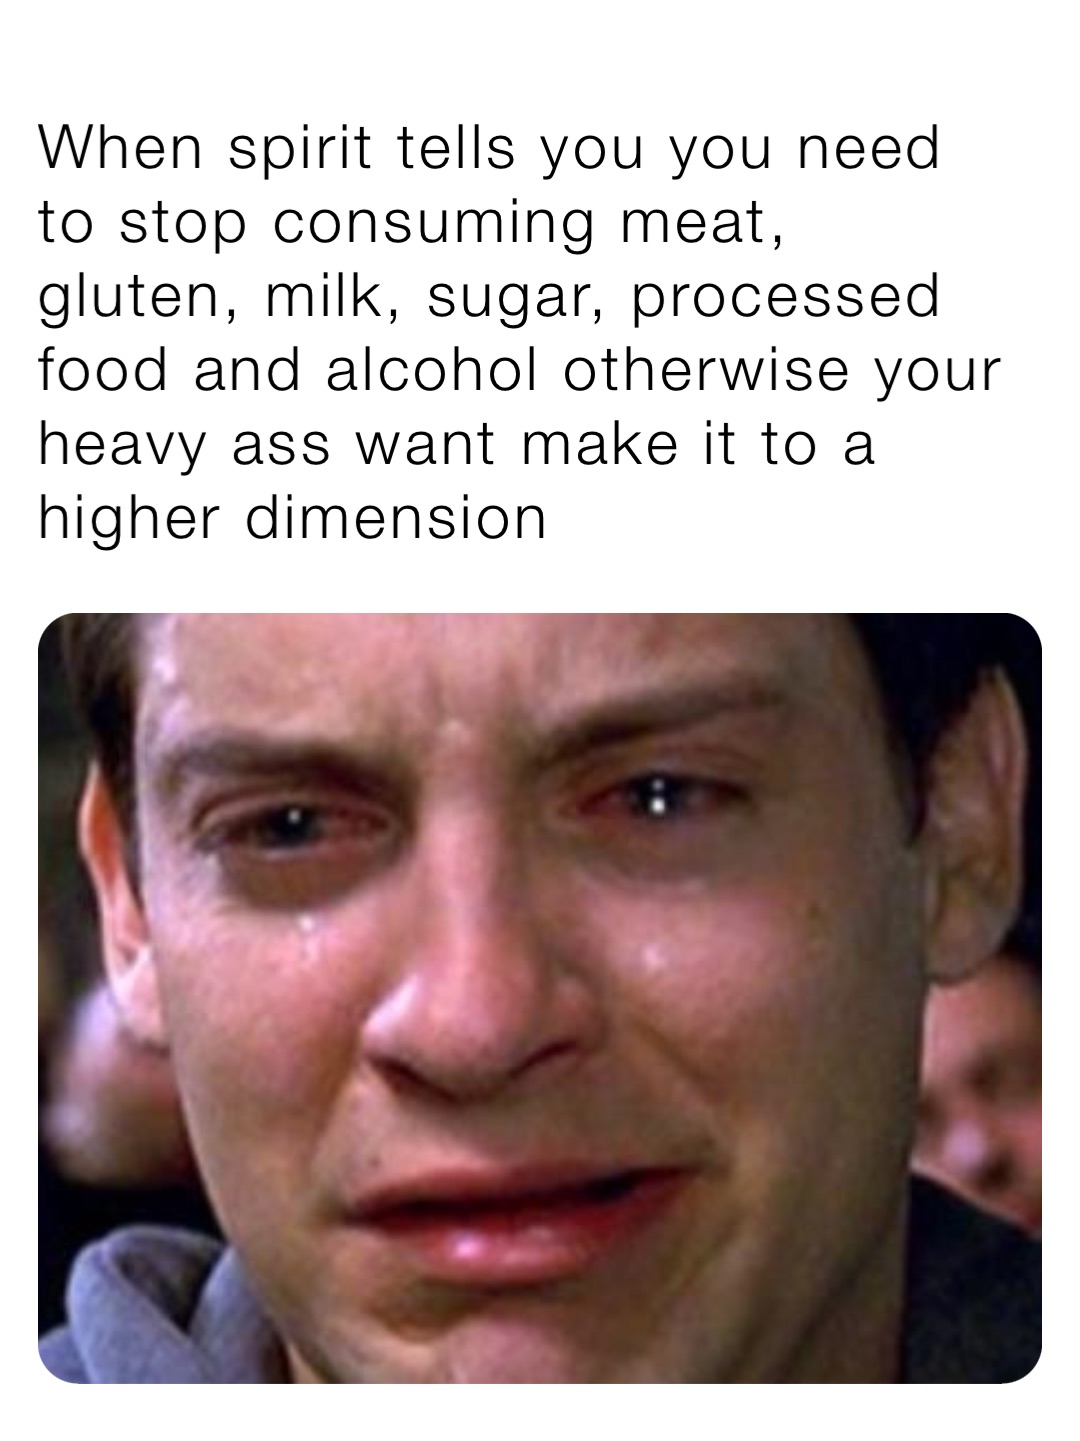 When spirit tells you you need to stop consuming meat, gluten, milk, sugar, processed food and alcohol otherwise your heavy ass want make it to a higher dimension